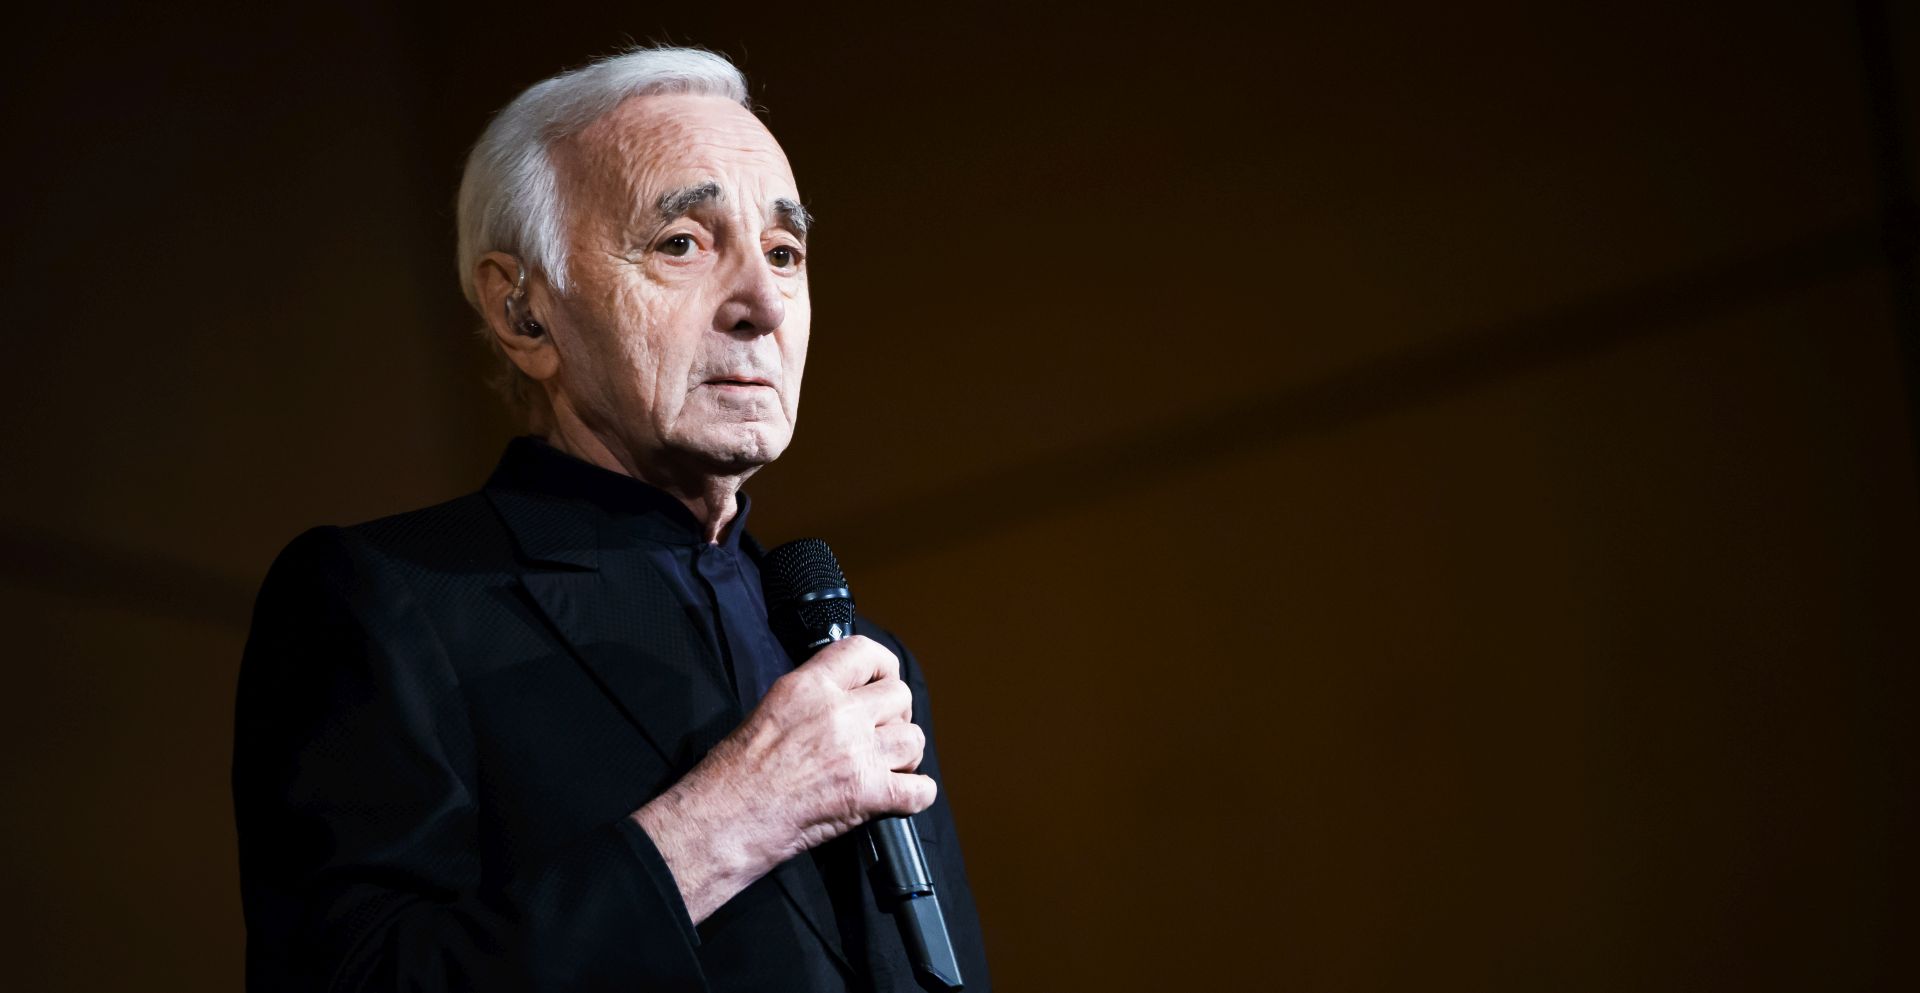 epa07061348 (FILE) - Armenian-born French singer Charles Aznavour performs during the Grand Concert de la Francophonie held in honor of Armenia, upcoming host country of the 17th Francophone Summit of the International Organization of French speakers, at the European headquarters of the United Nations in Geneva, Switzerland, 13 March 2018 (reissued 01 October 2018). According to reports Armenian-born French singer Charles Aznavour has died aged 94 on 01 October 2018.  EPA/VALENTIN FLAURAUD